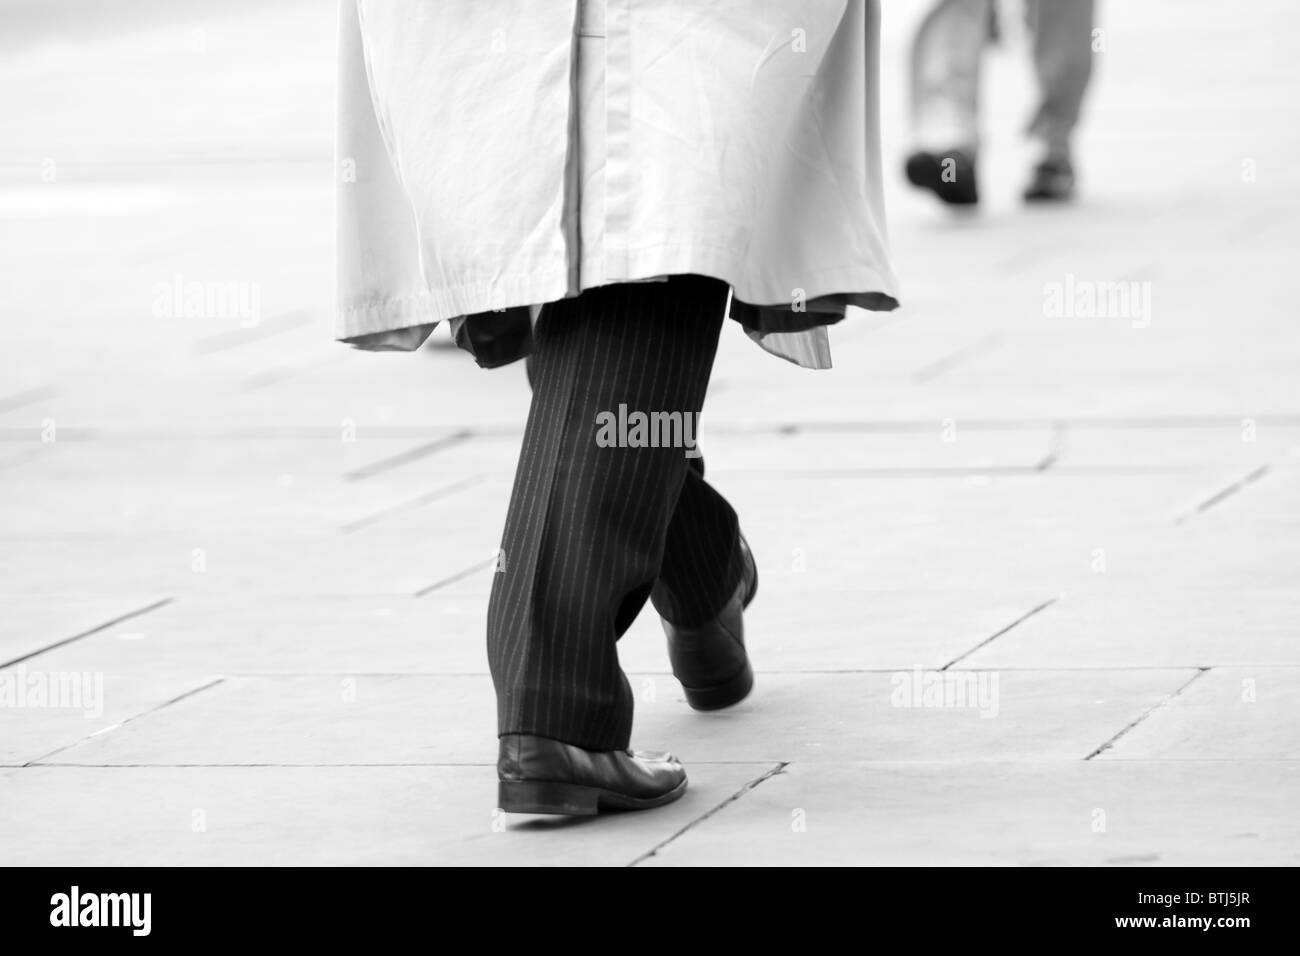 Daylight black white feet shoes getting around getting to work late for work rat race coats cloths lifestyle London life City Stock Photo